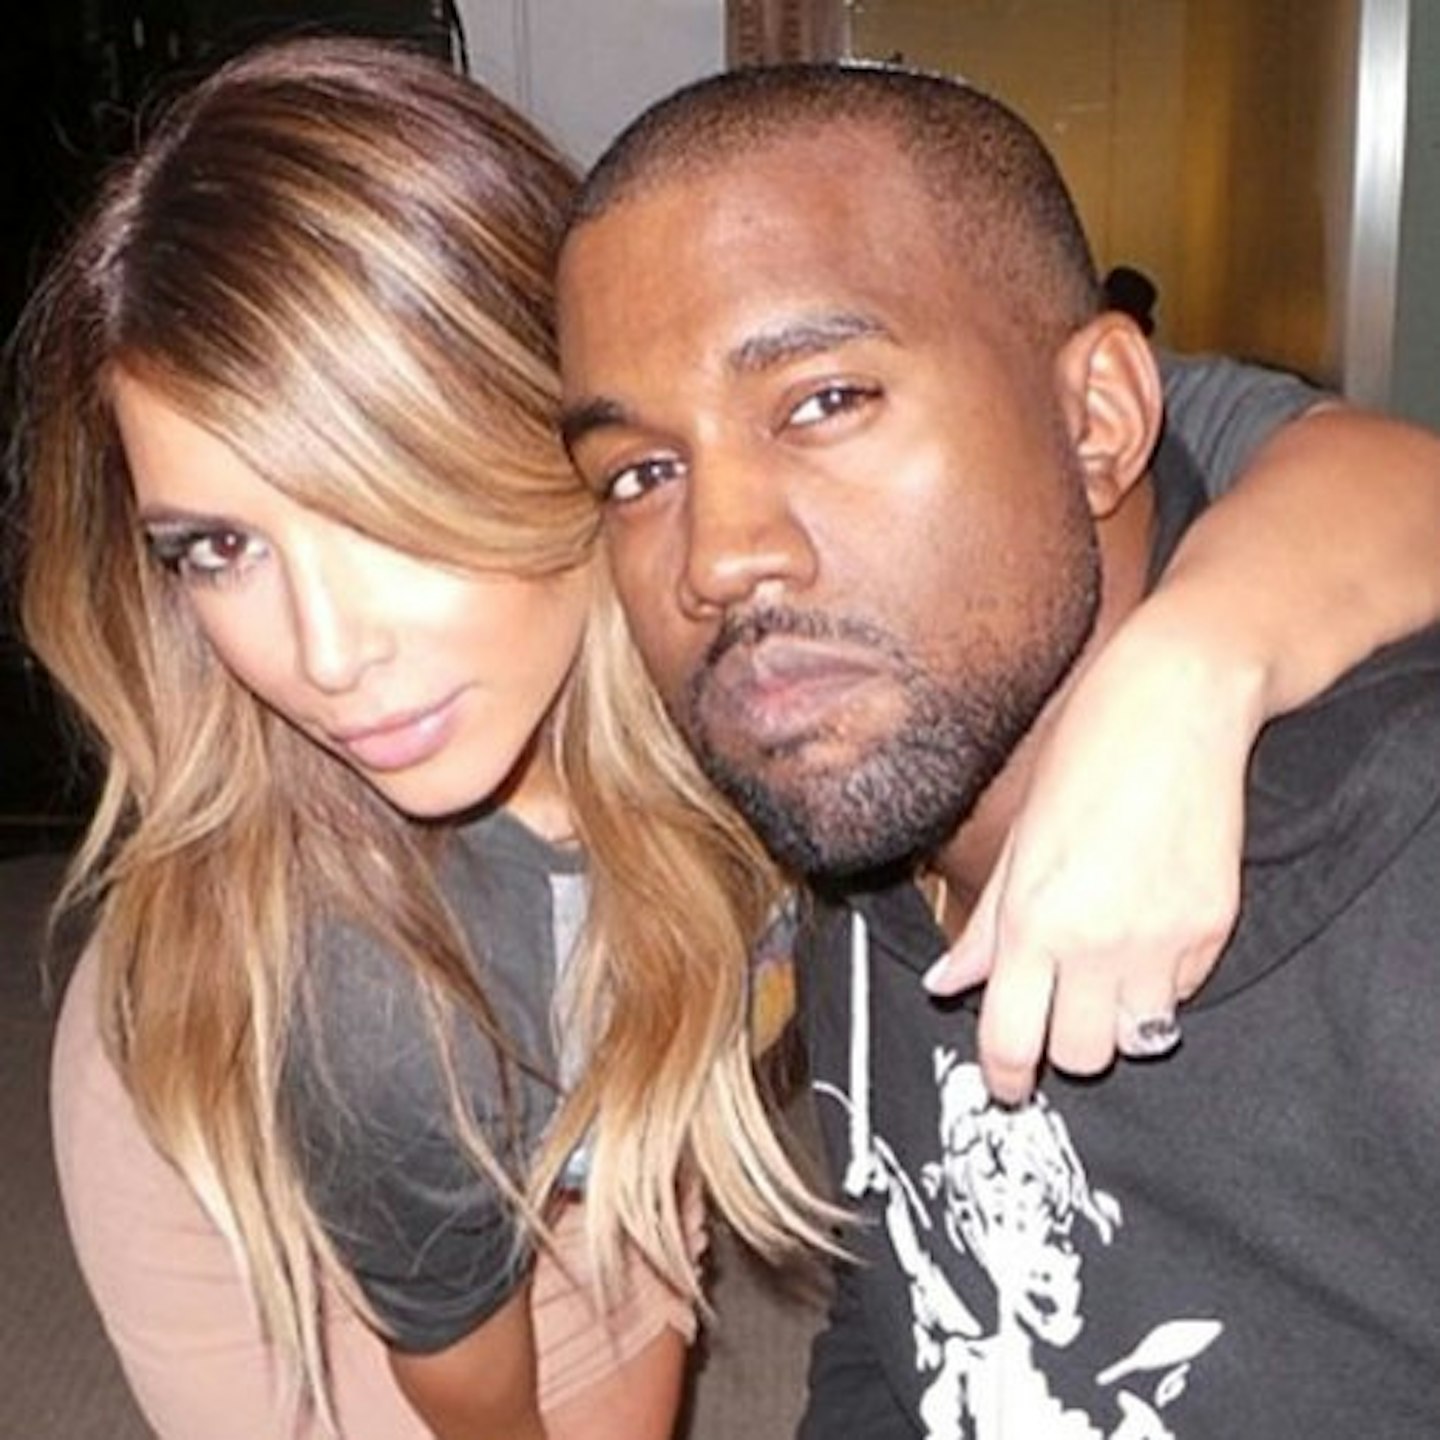 Kanye West was reportedly furious when he heard of the racial attack on Kim Kardashian